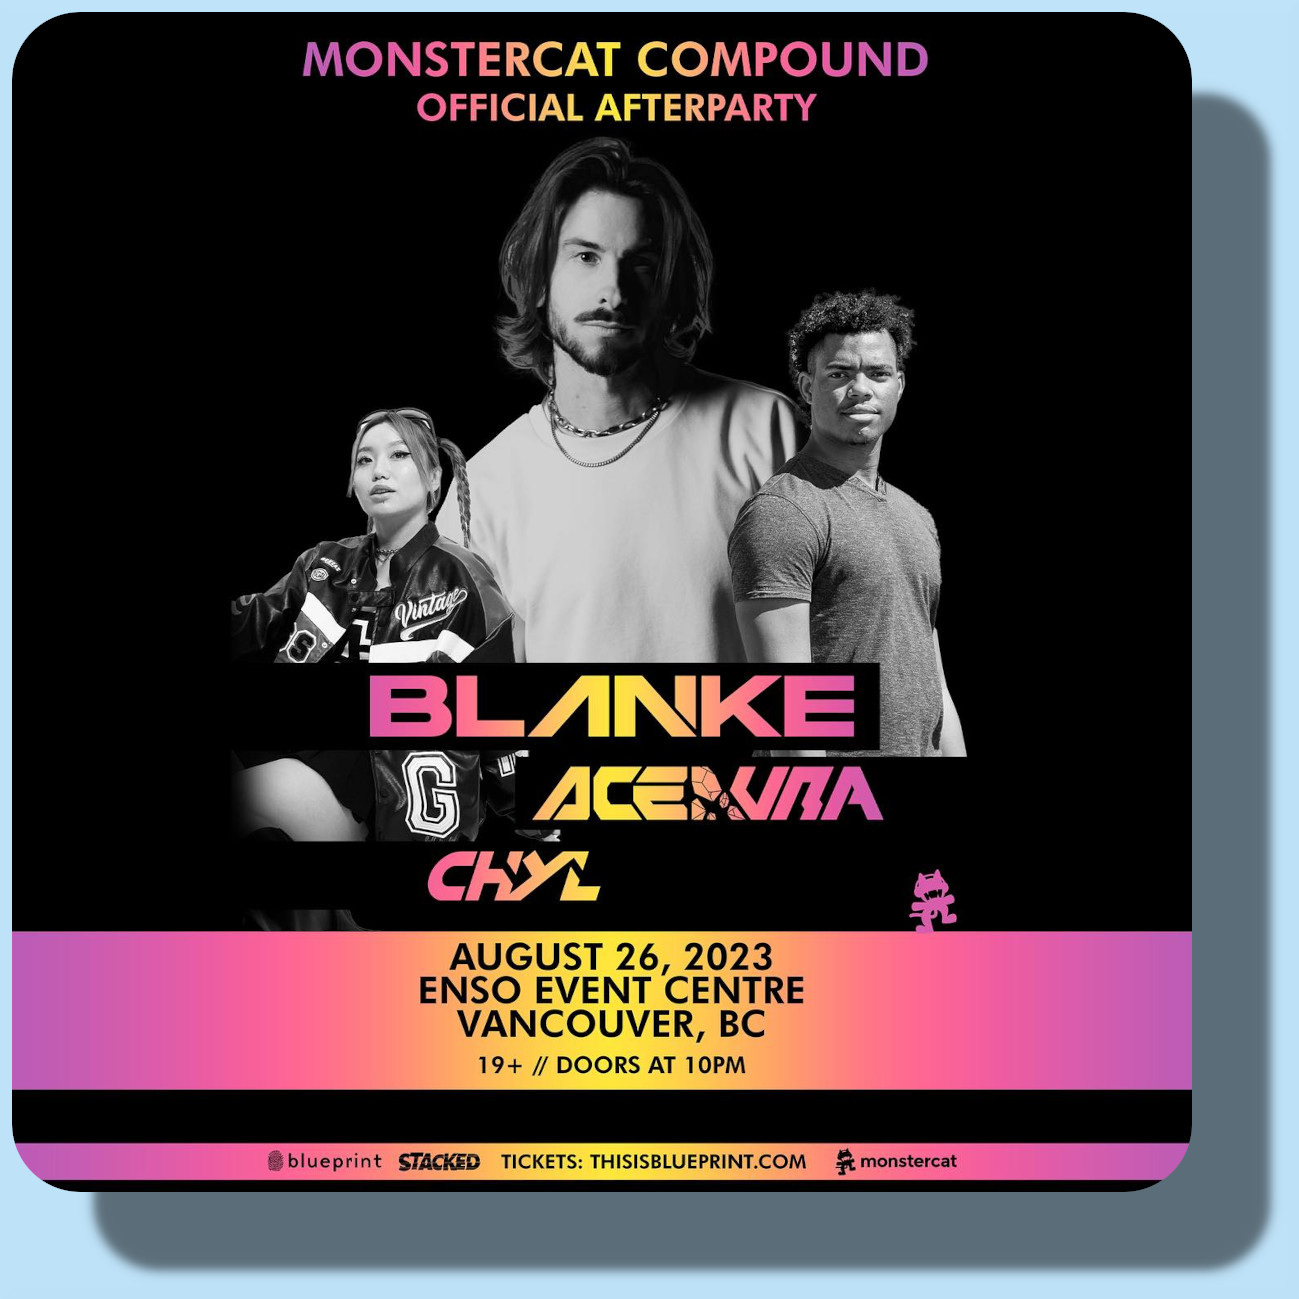 BLANKE Live at Enso Event Centre: August 26, 2023